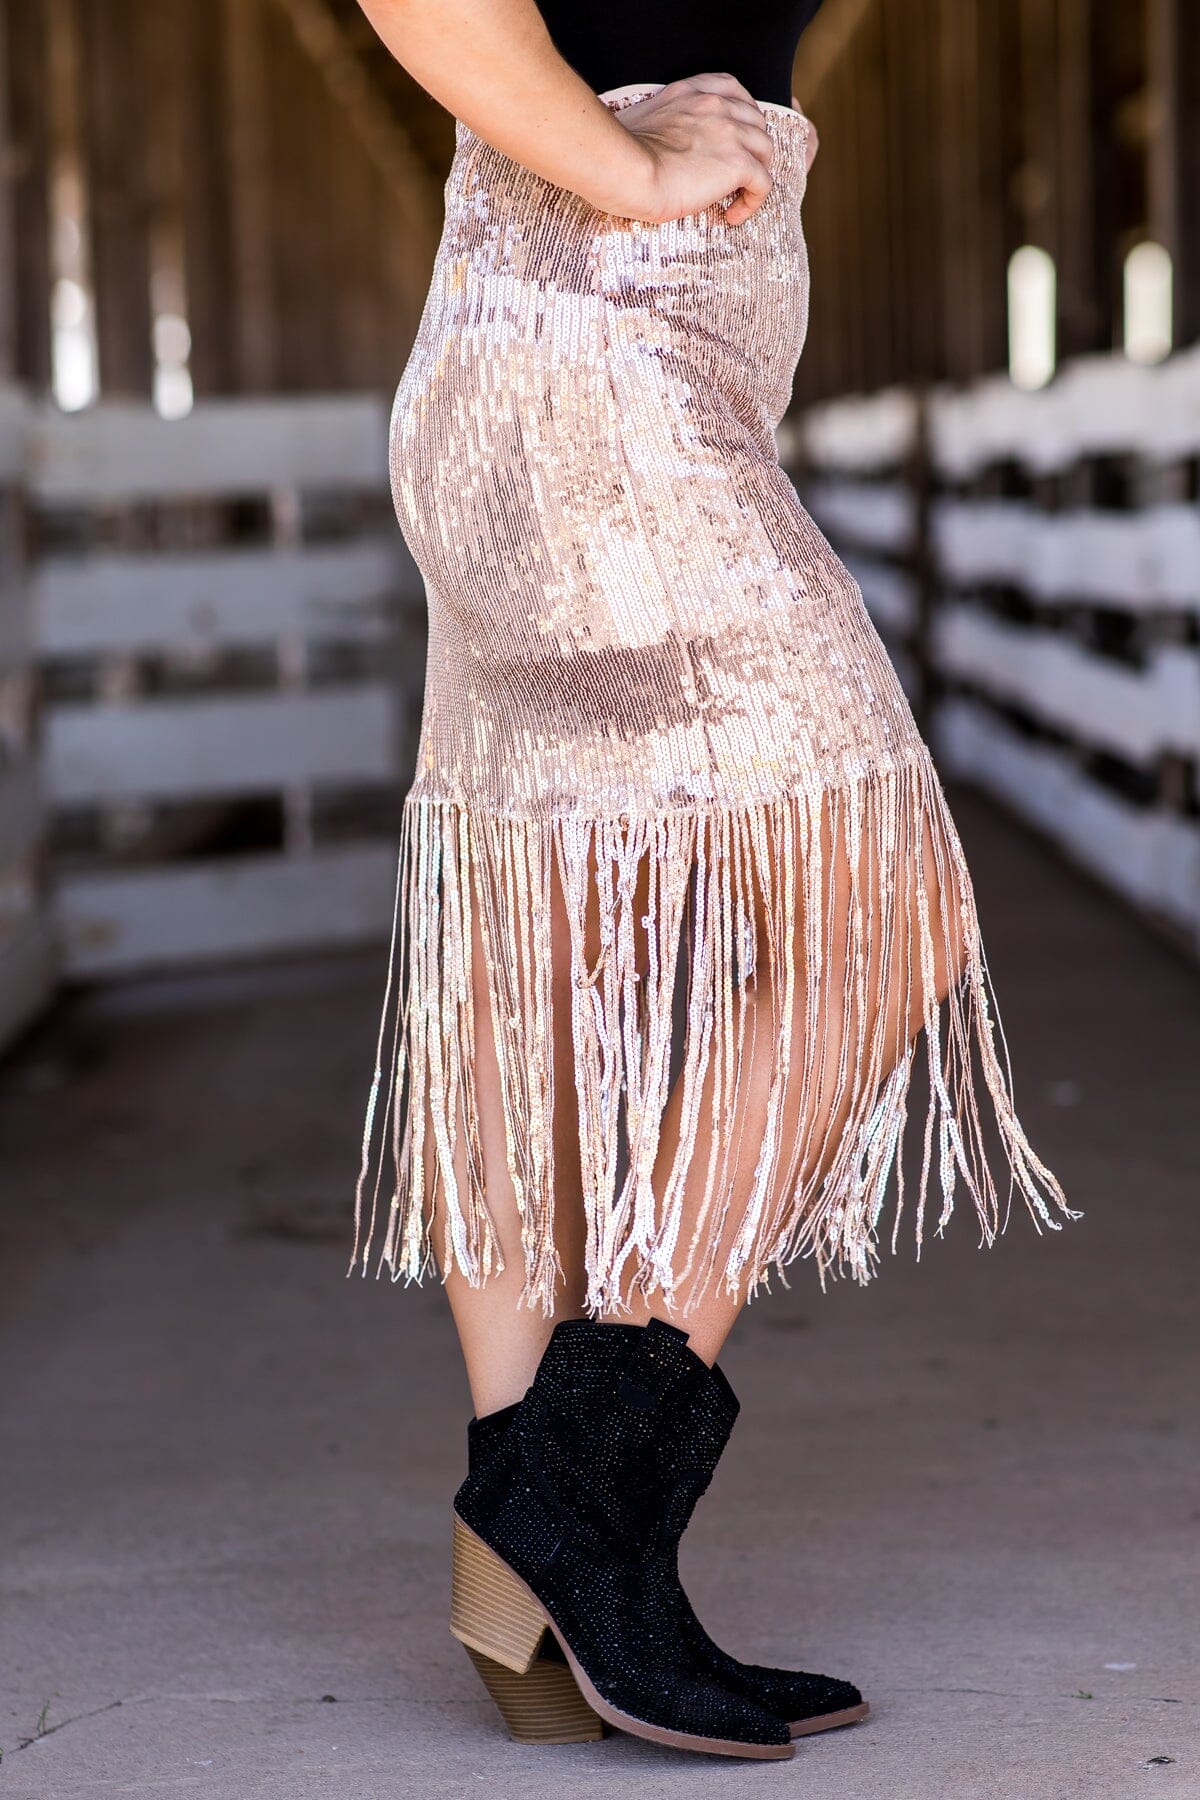 Rose Gold Sequin Midi Skirt With Fringe - Filly Flair